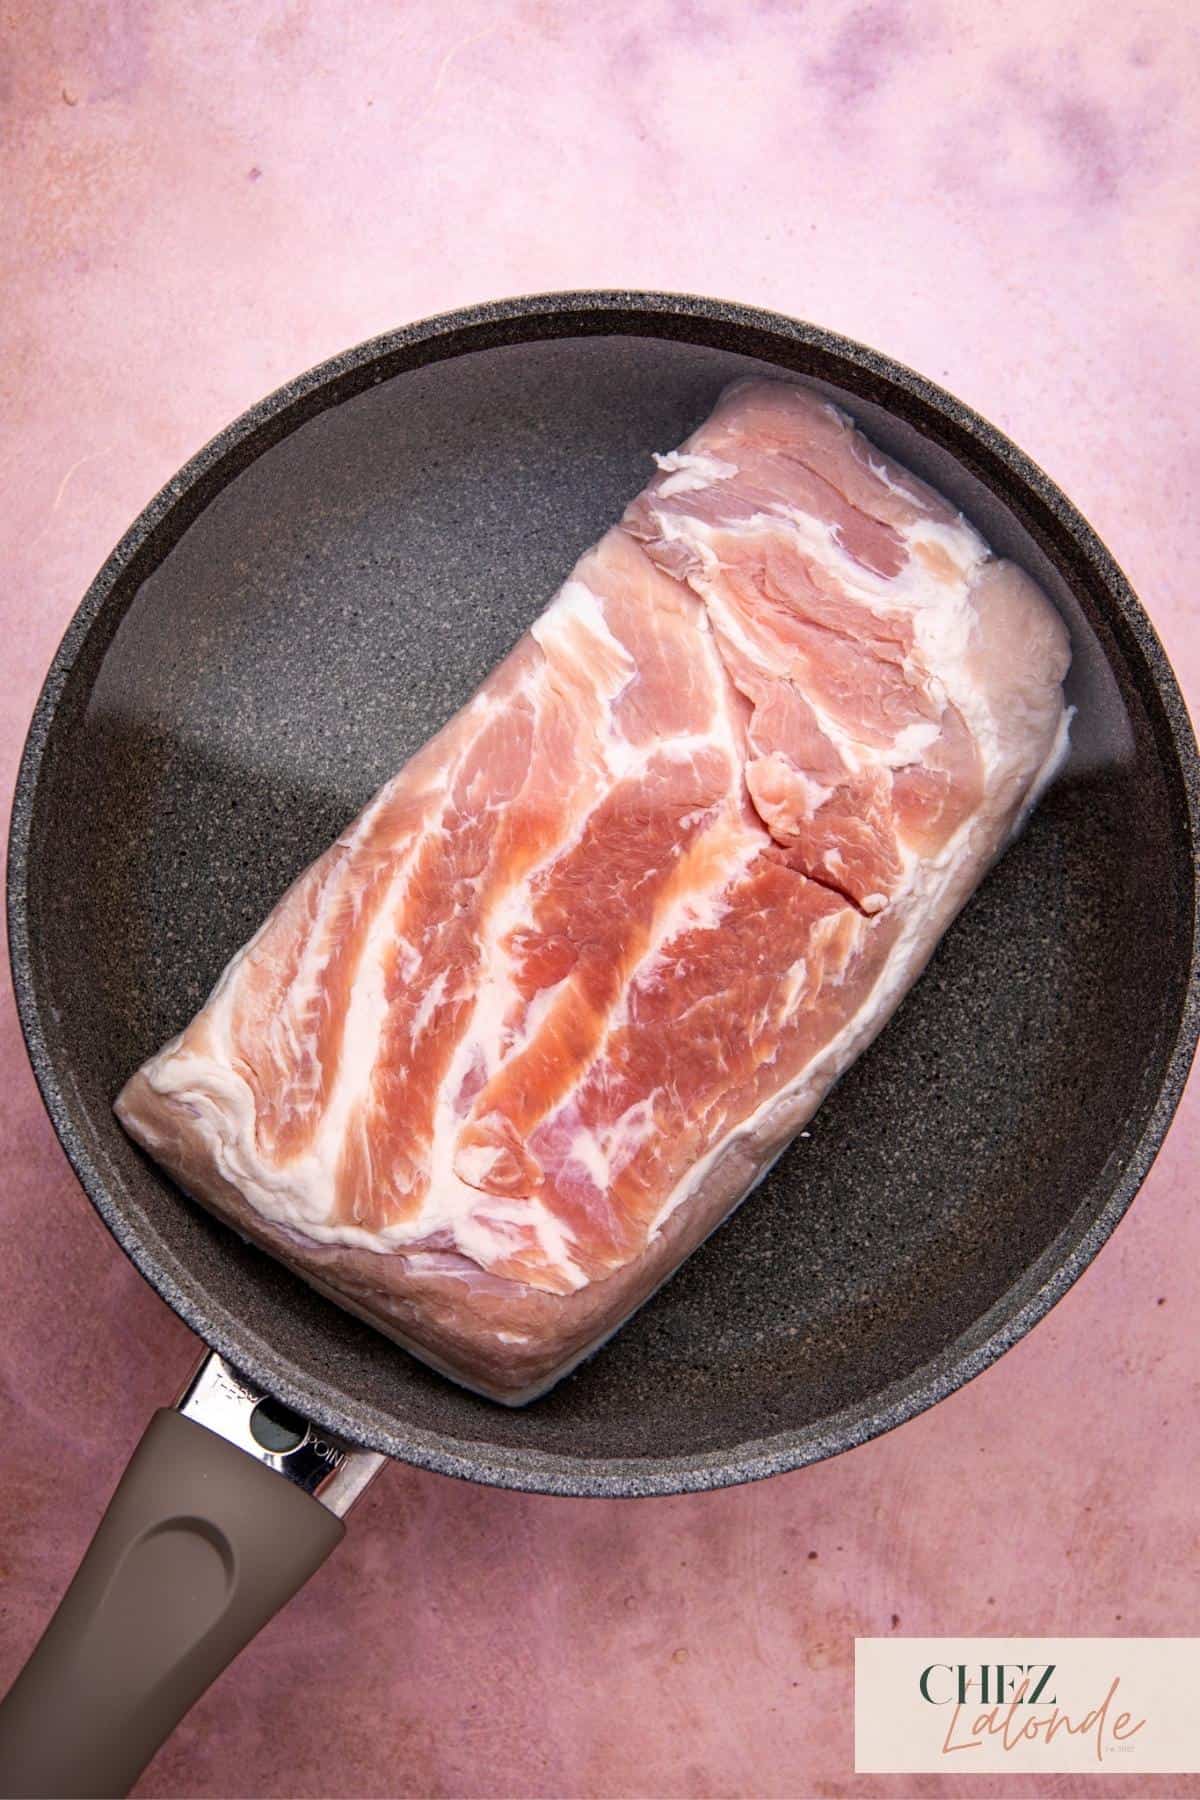 Pre-boil the pork belly in a wok to remove impurities. 